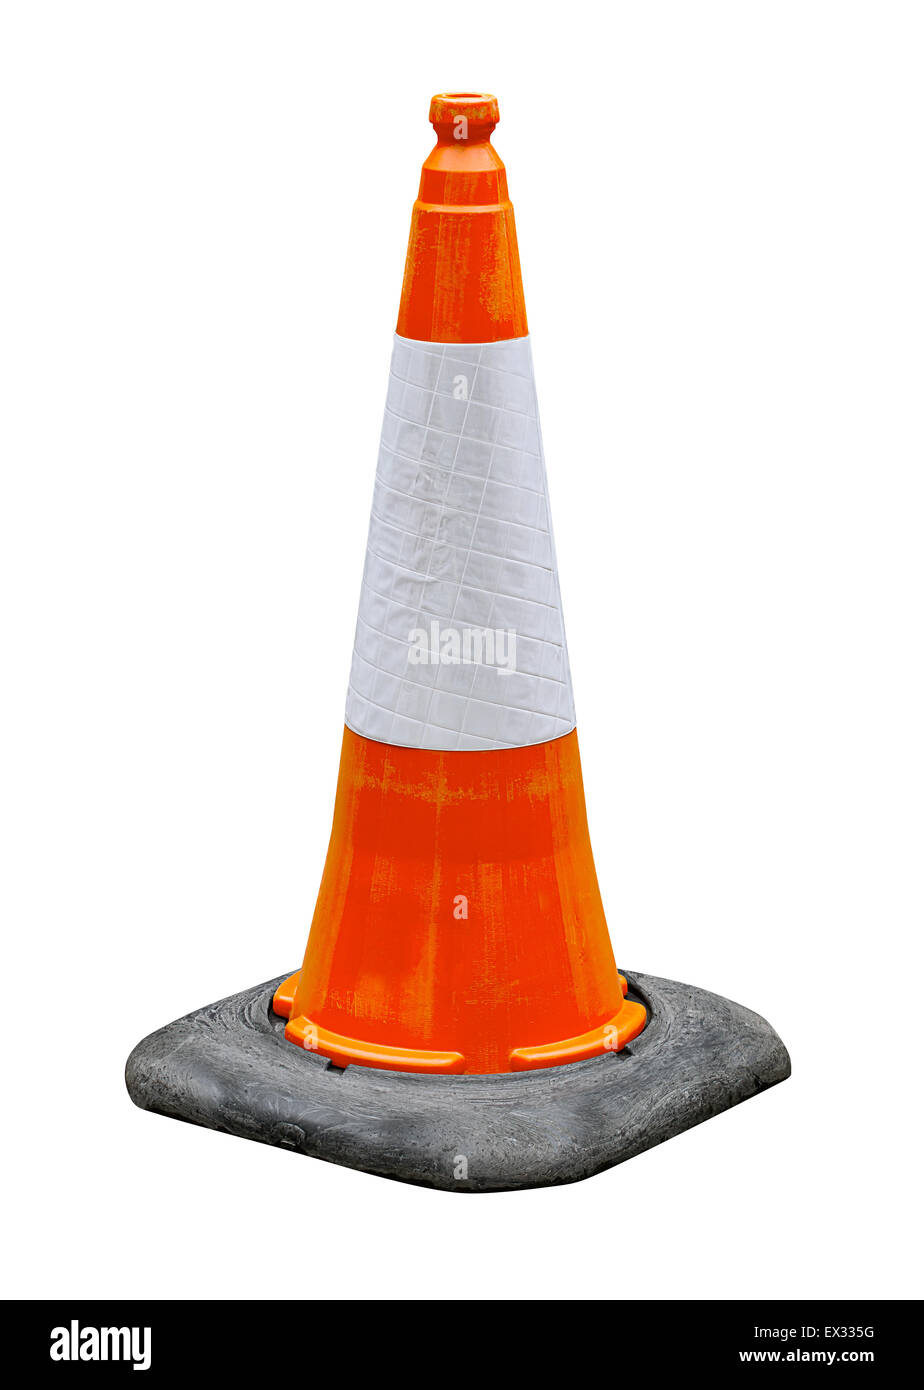 Orange and White reflective traffic cone isolated against a white background great concept for hazards and safety. Stock Photo